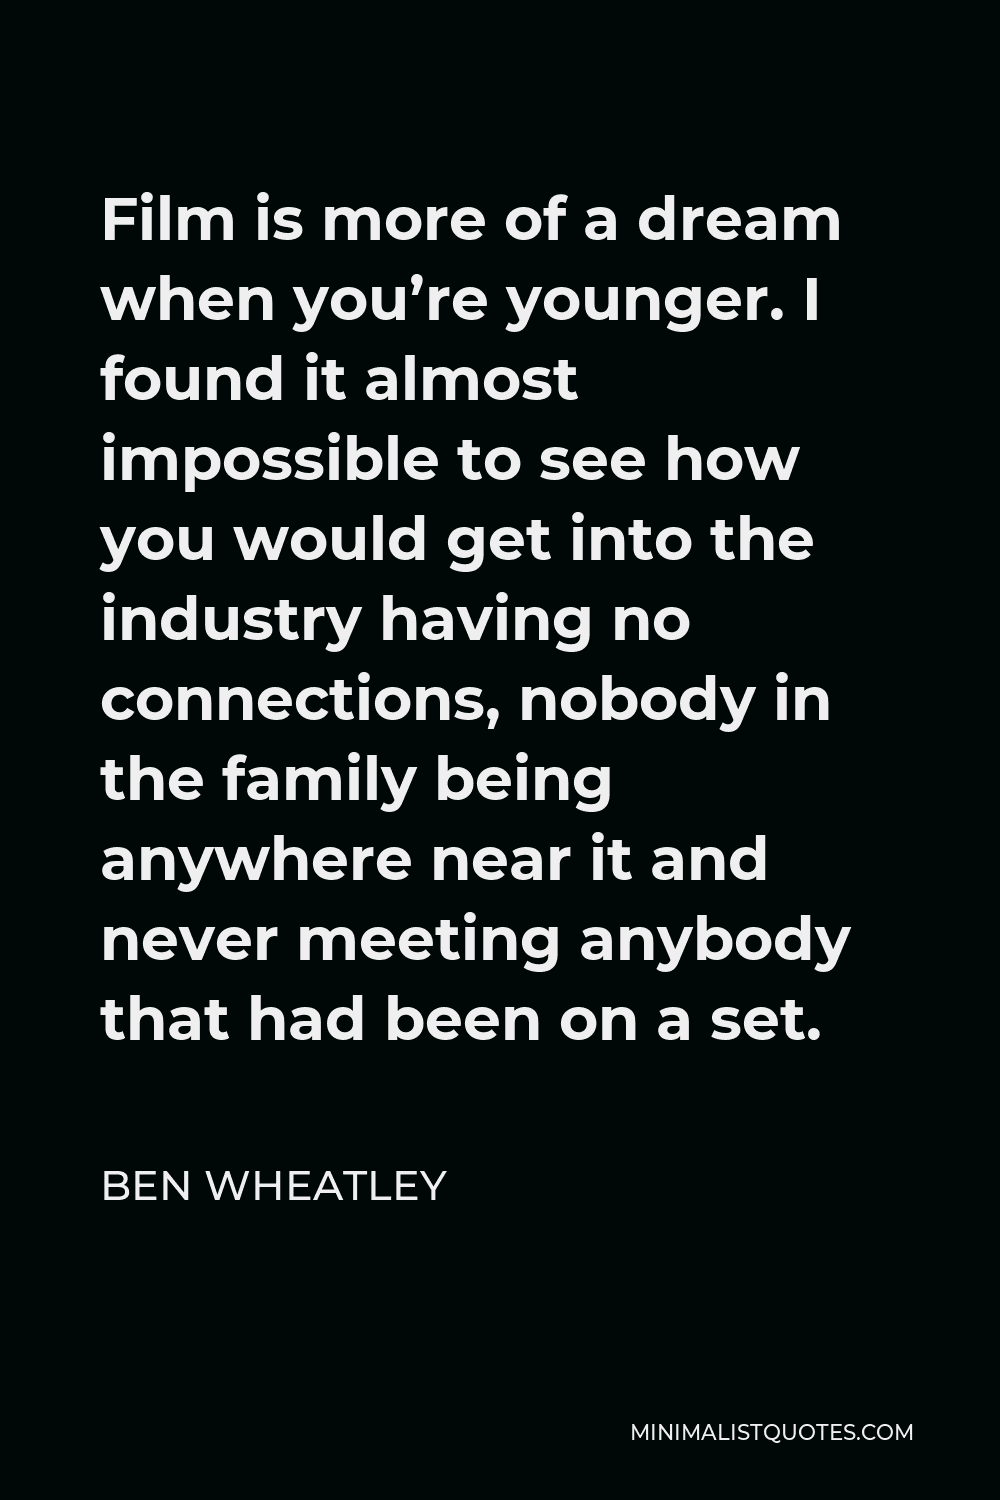 Ben Wheatley Quote - Film is more of a dream when you’re younger. I found it almost impossible to see how you would get into the industry having no connections, nobody in the family being anywhere near it and never meeting anybody that had been on a set.